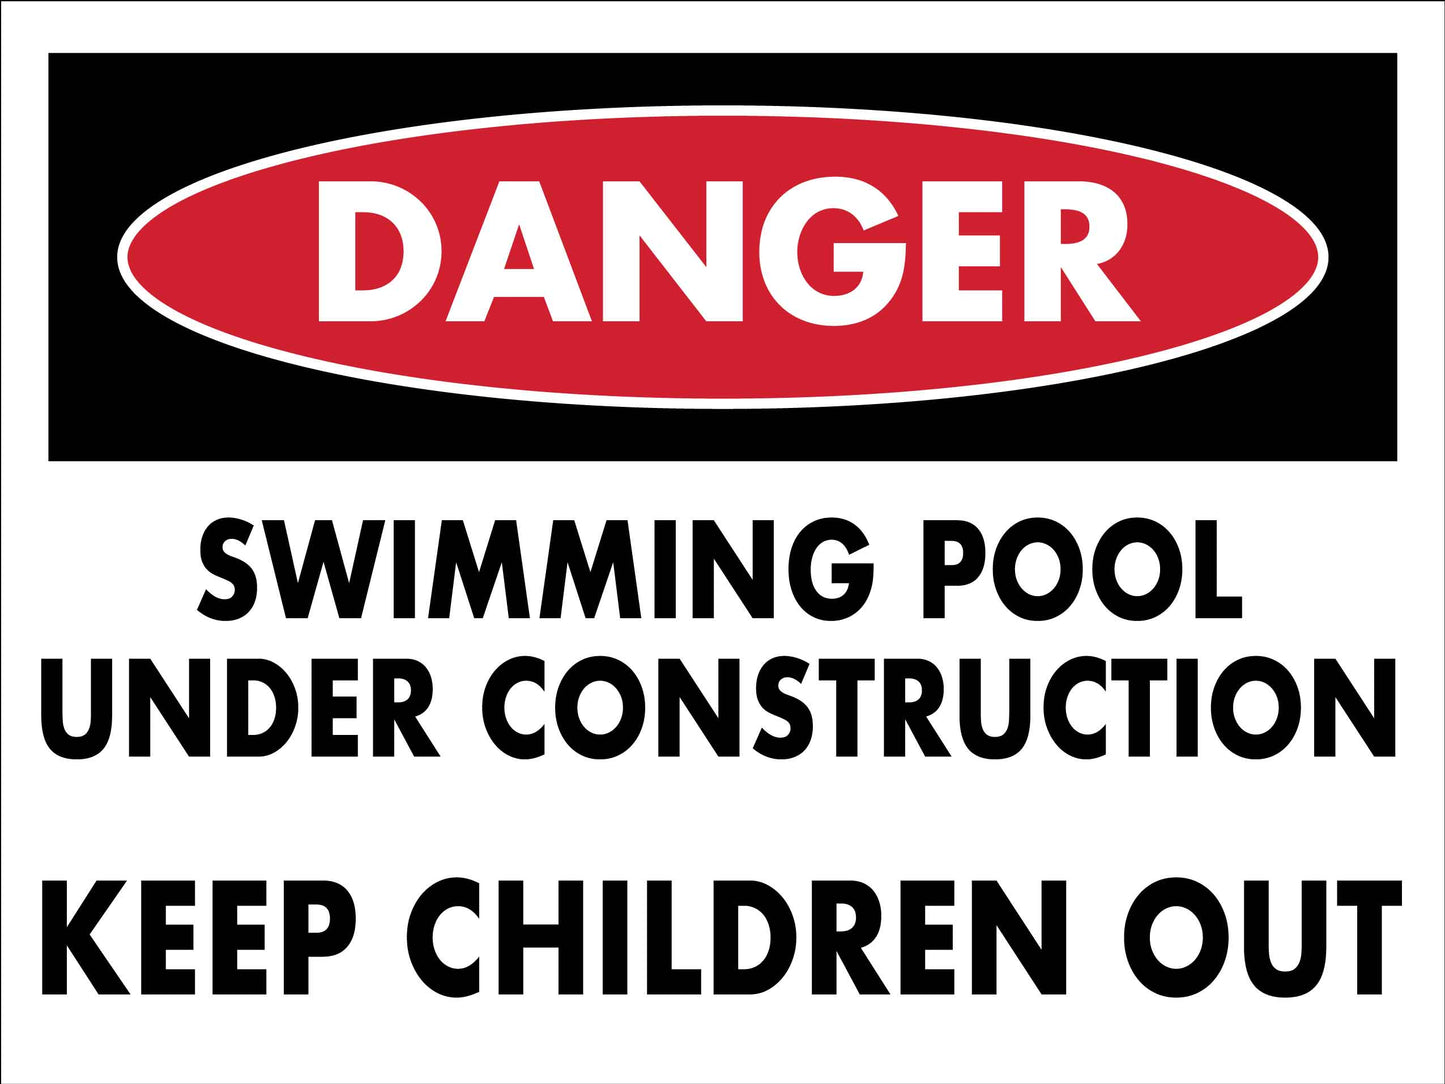 Danger Swimming Pool Under Construction Children Keep Out Sign